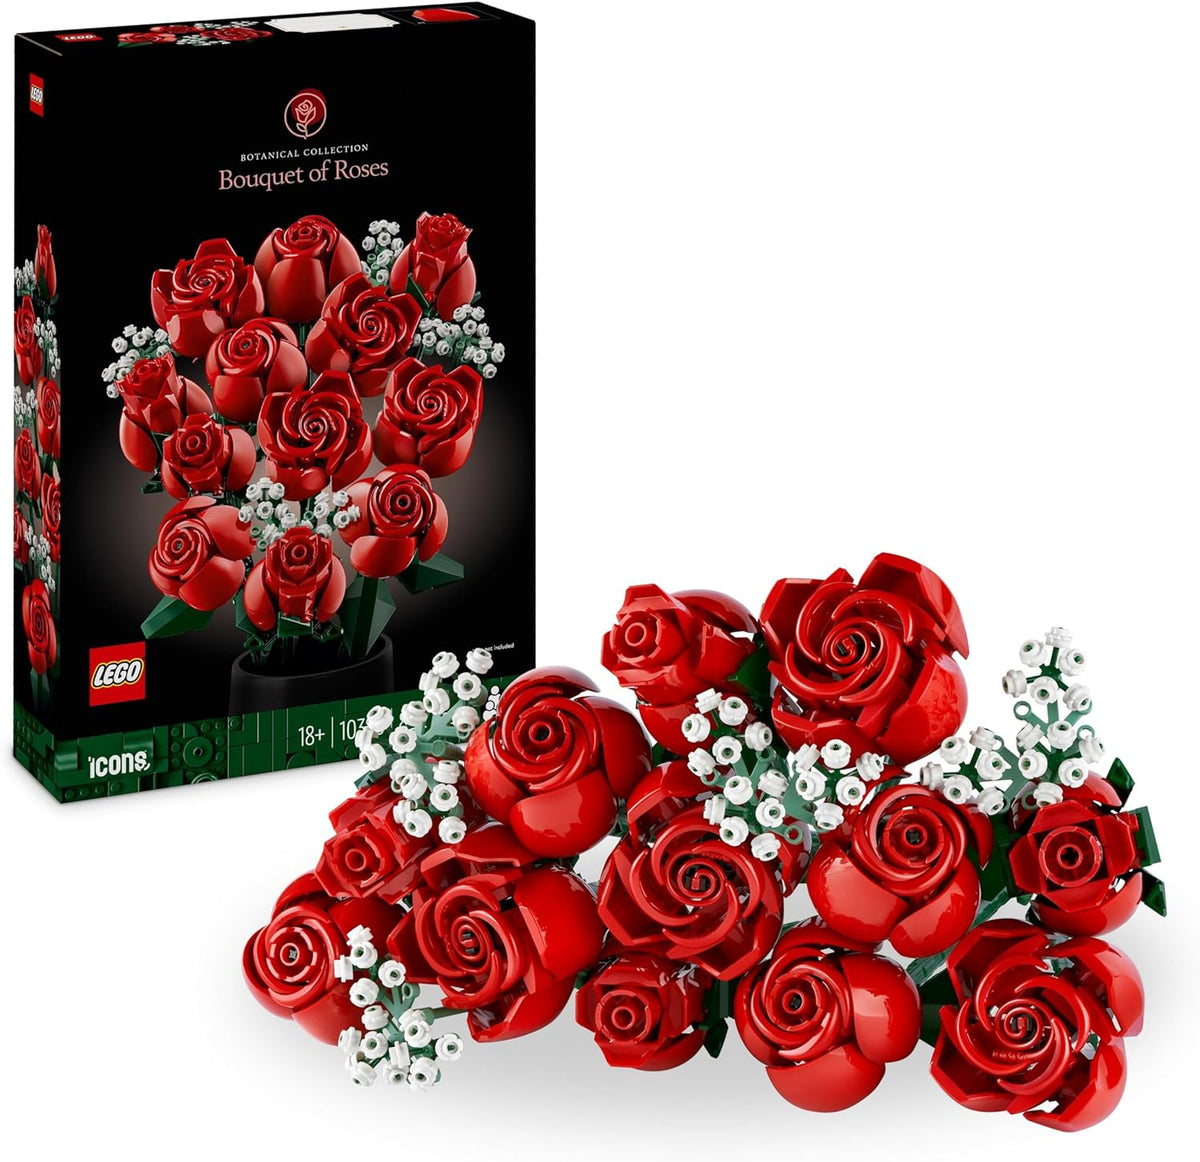 LEGO Icons Bouquet of Roses, Artificial Flowers Set for Adults, Botanical Collection, Home Décor Accessories, Valentine’s Day Treat, Gifts